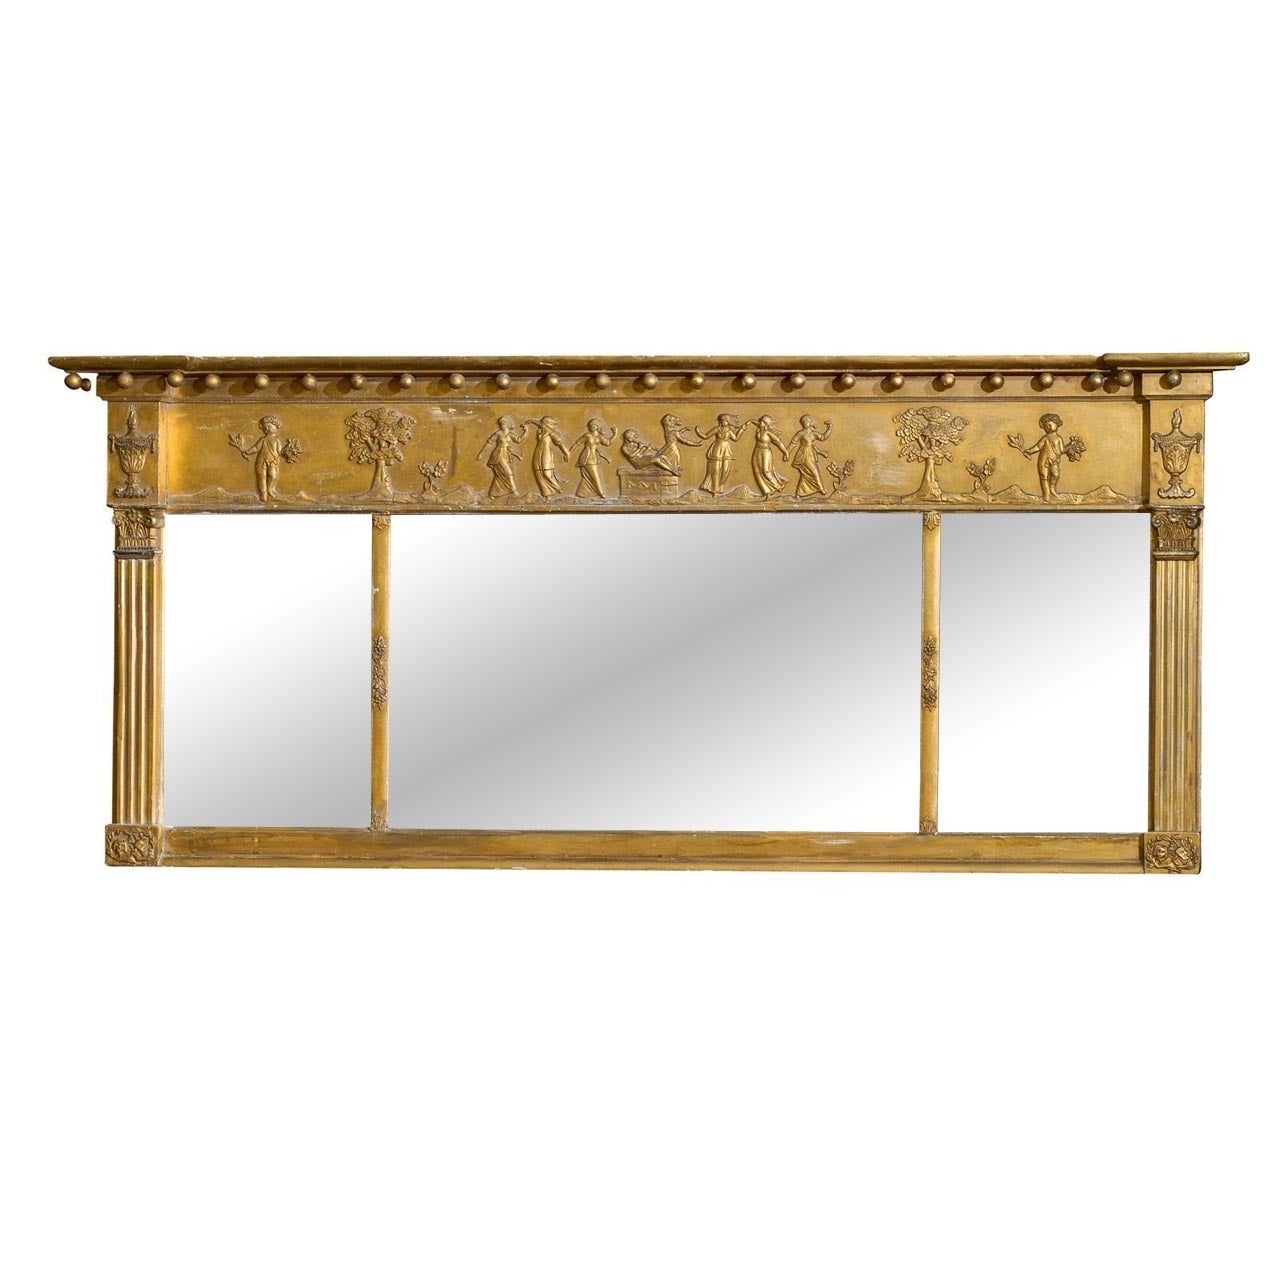 Neoclassical Style Gilt Overmantel Mirror, Late 19th Century